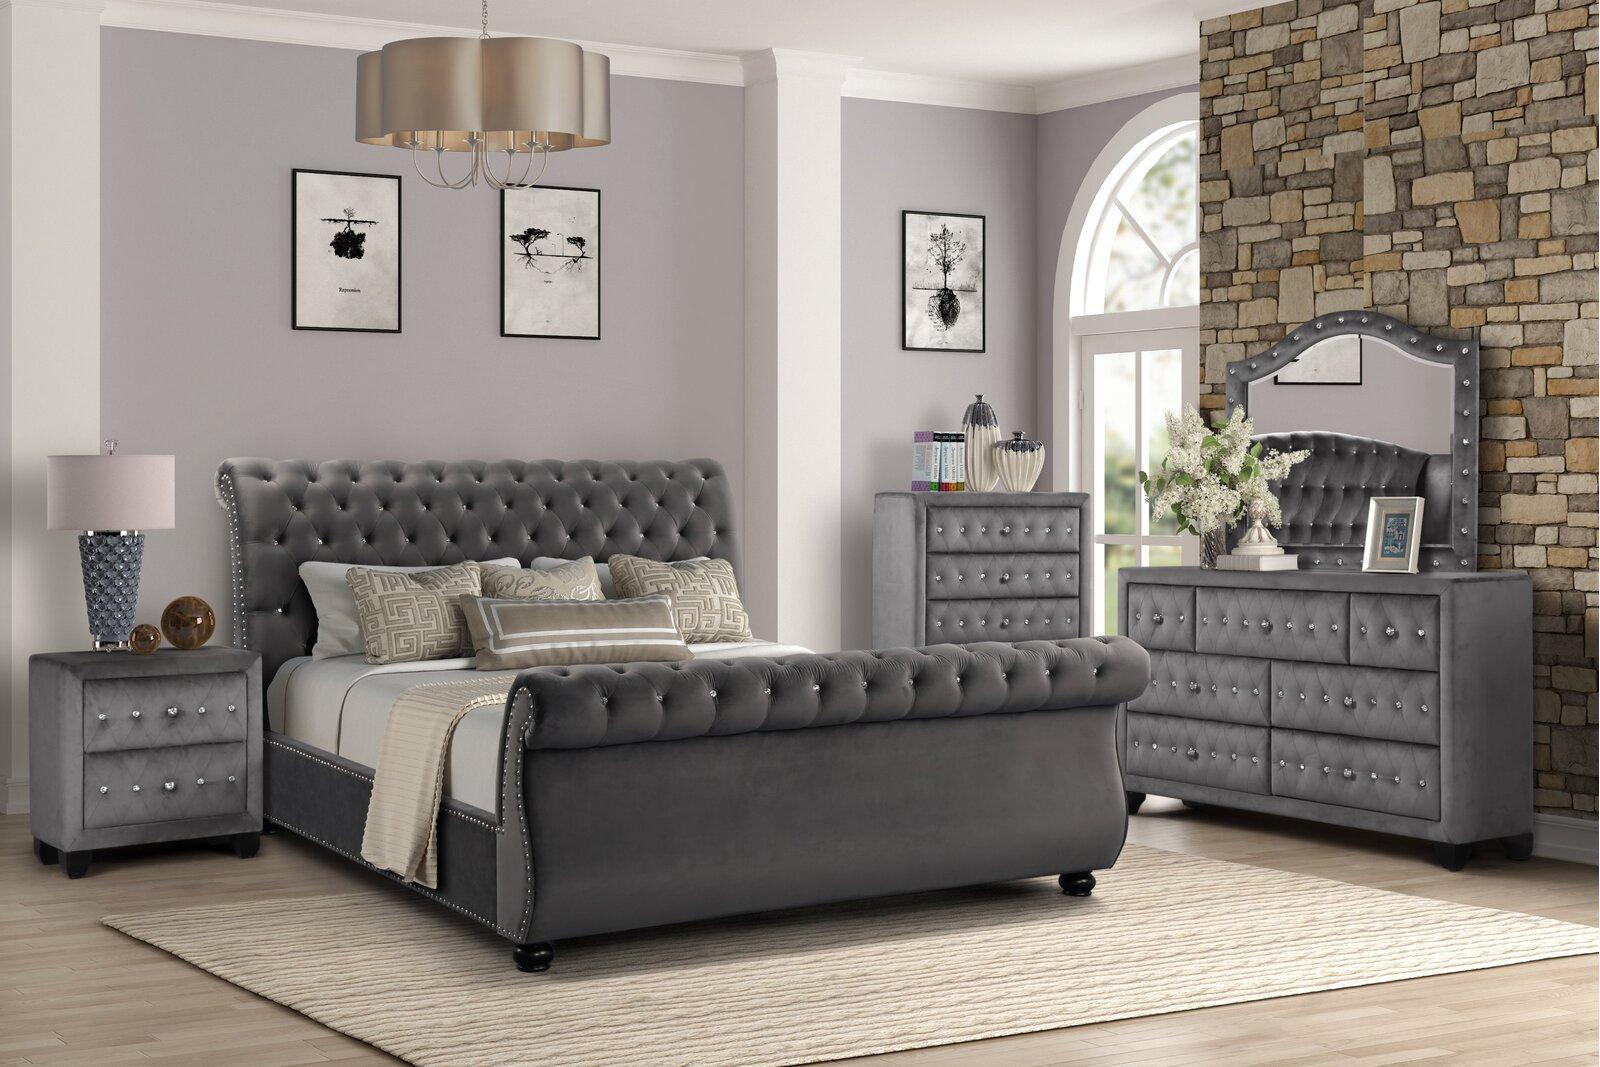 

    
Gray Velvet Crystal Tufted Queen Bed Set 5Pcs KENDALL Galaxy Home Contemporary
